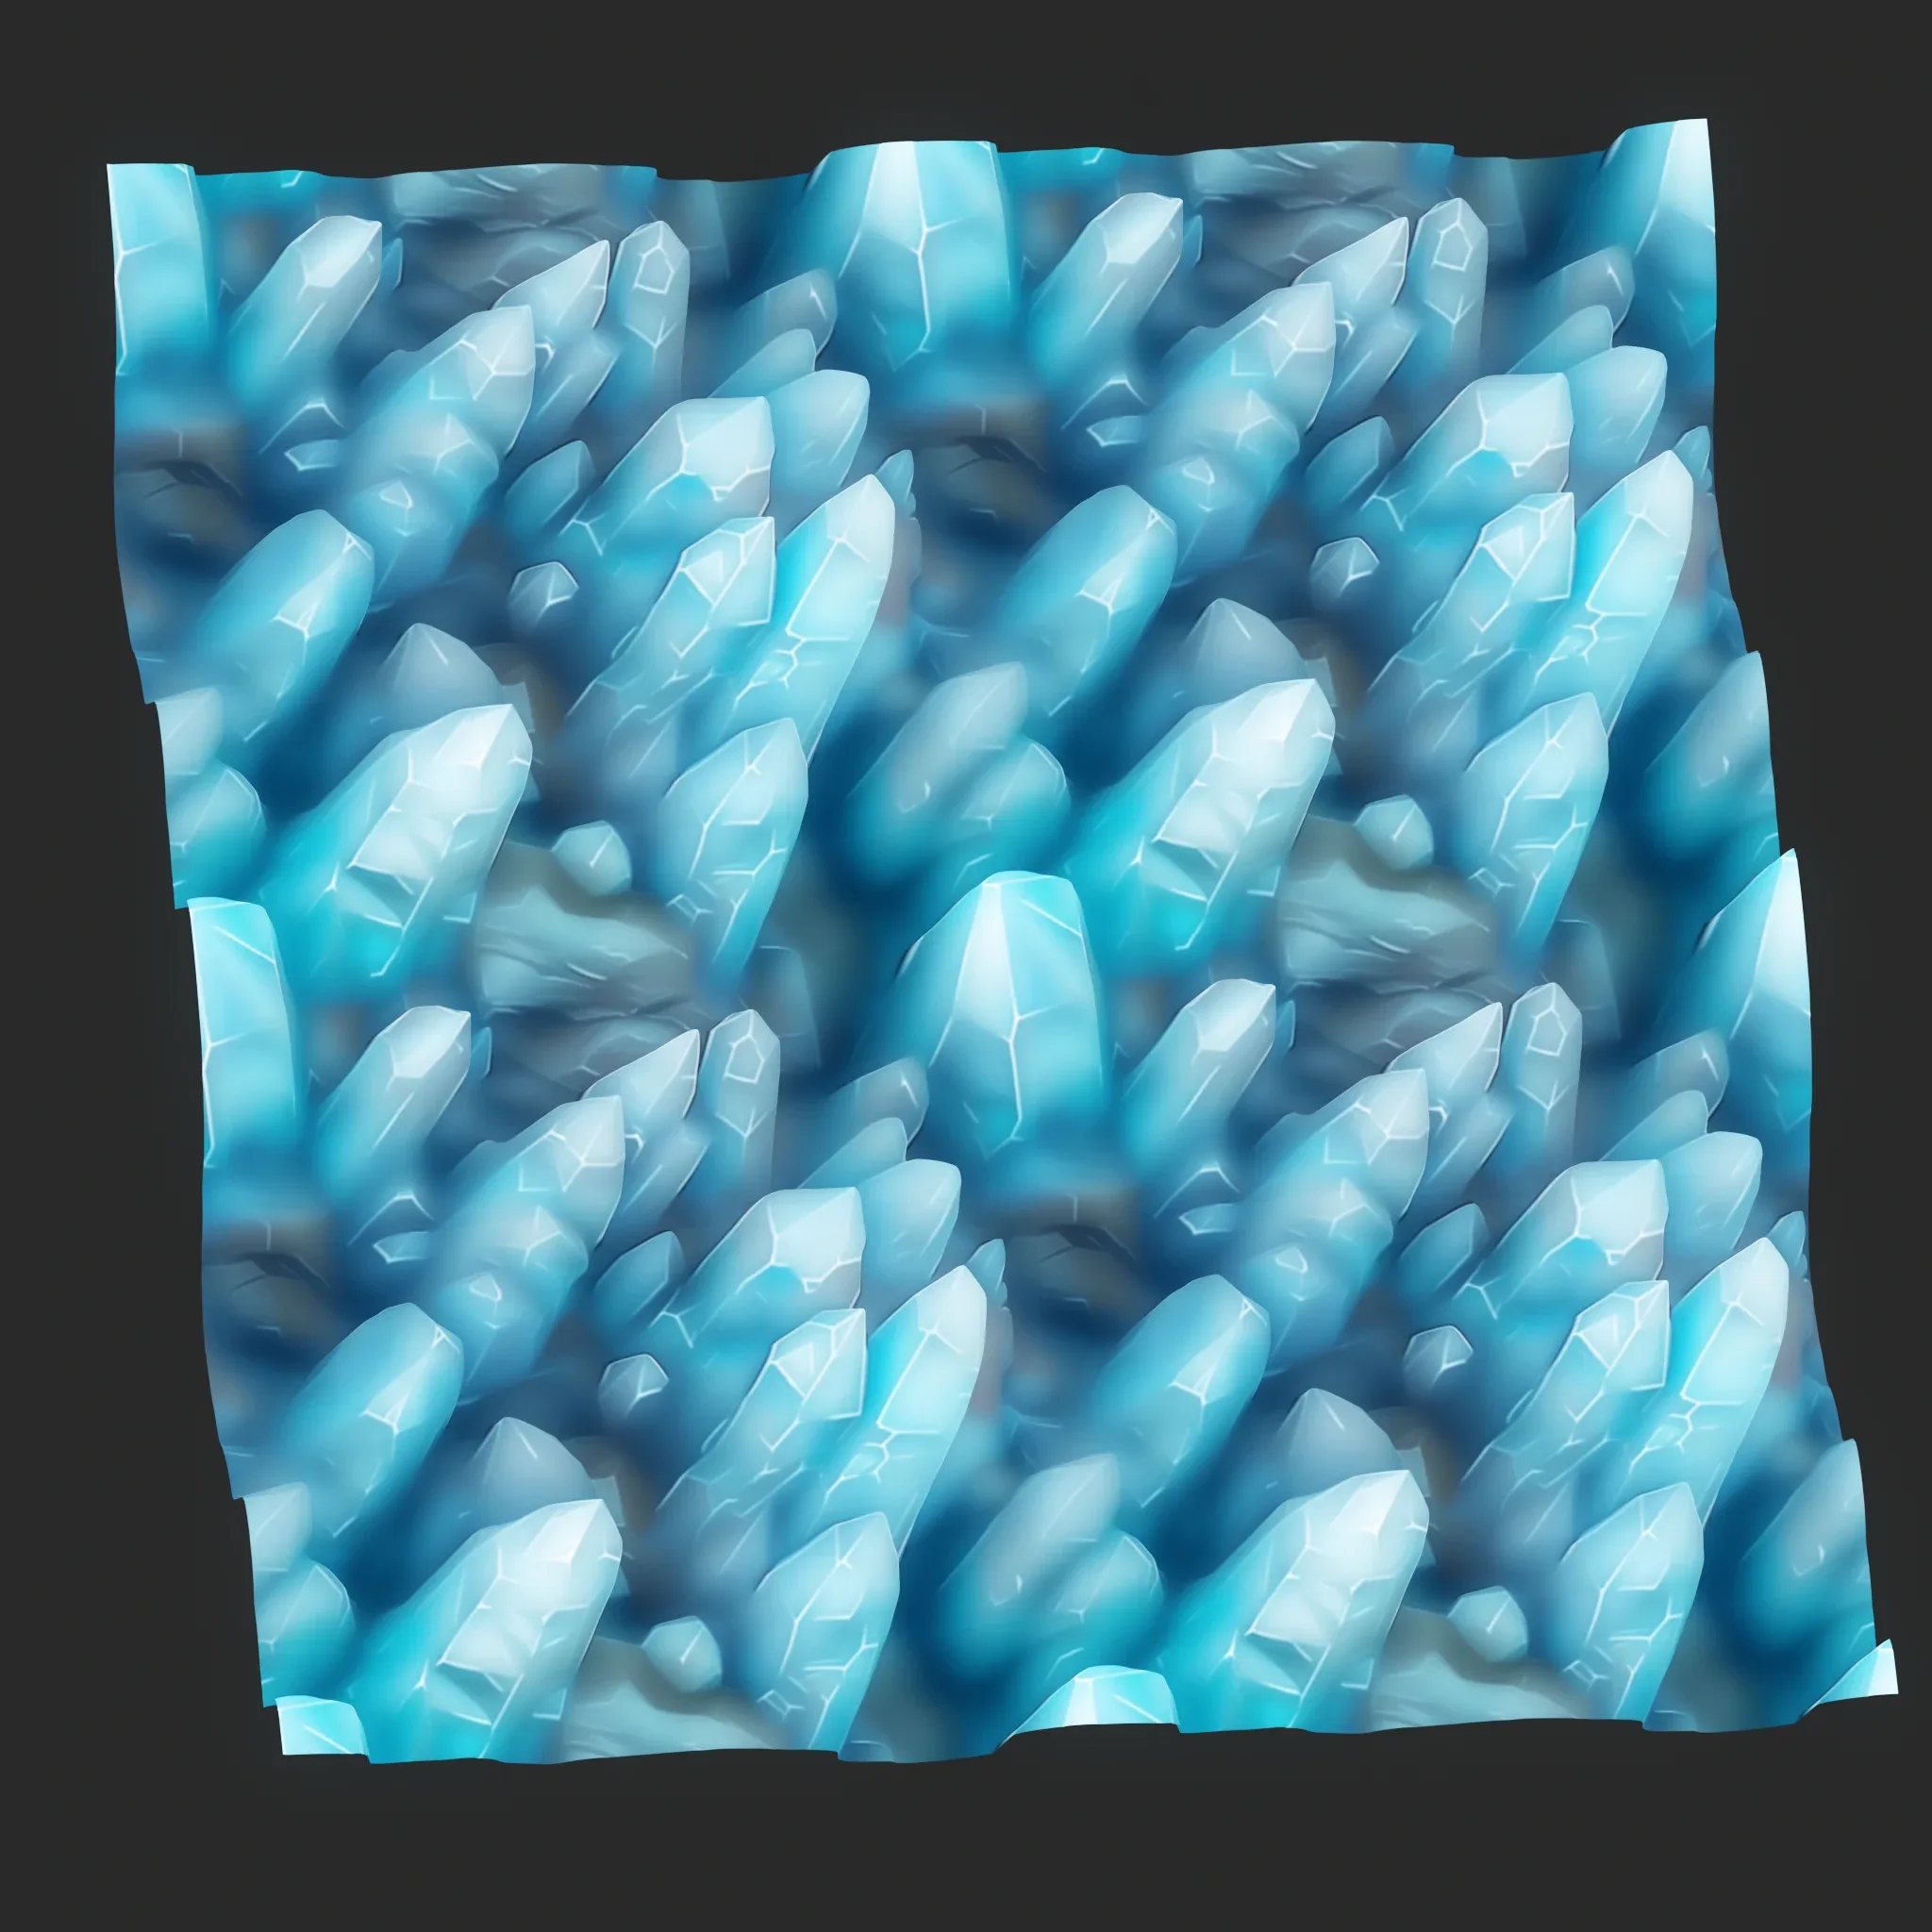 Stylized Crystal Seamless Texture